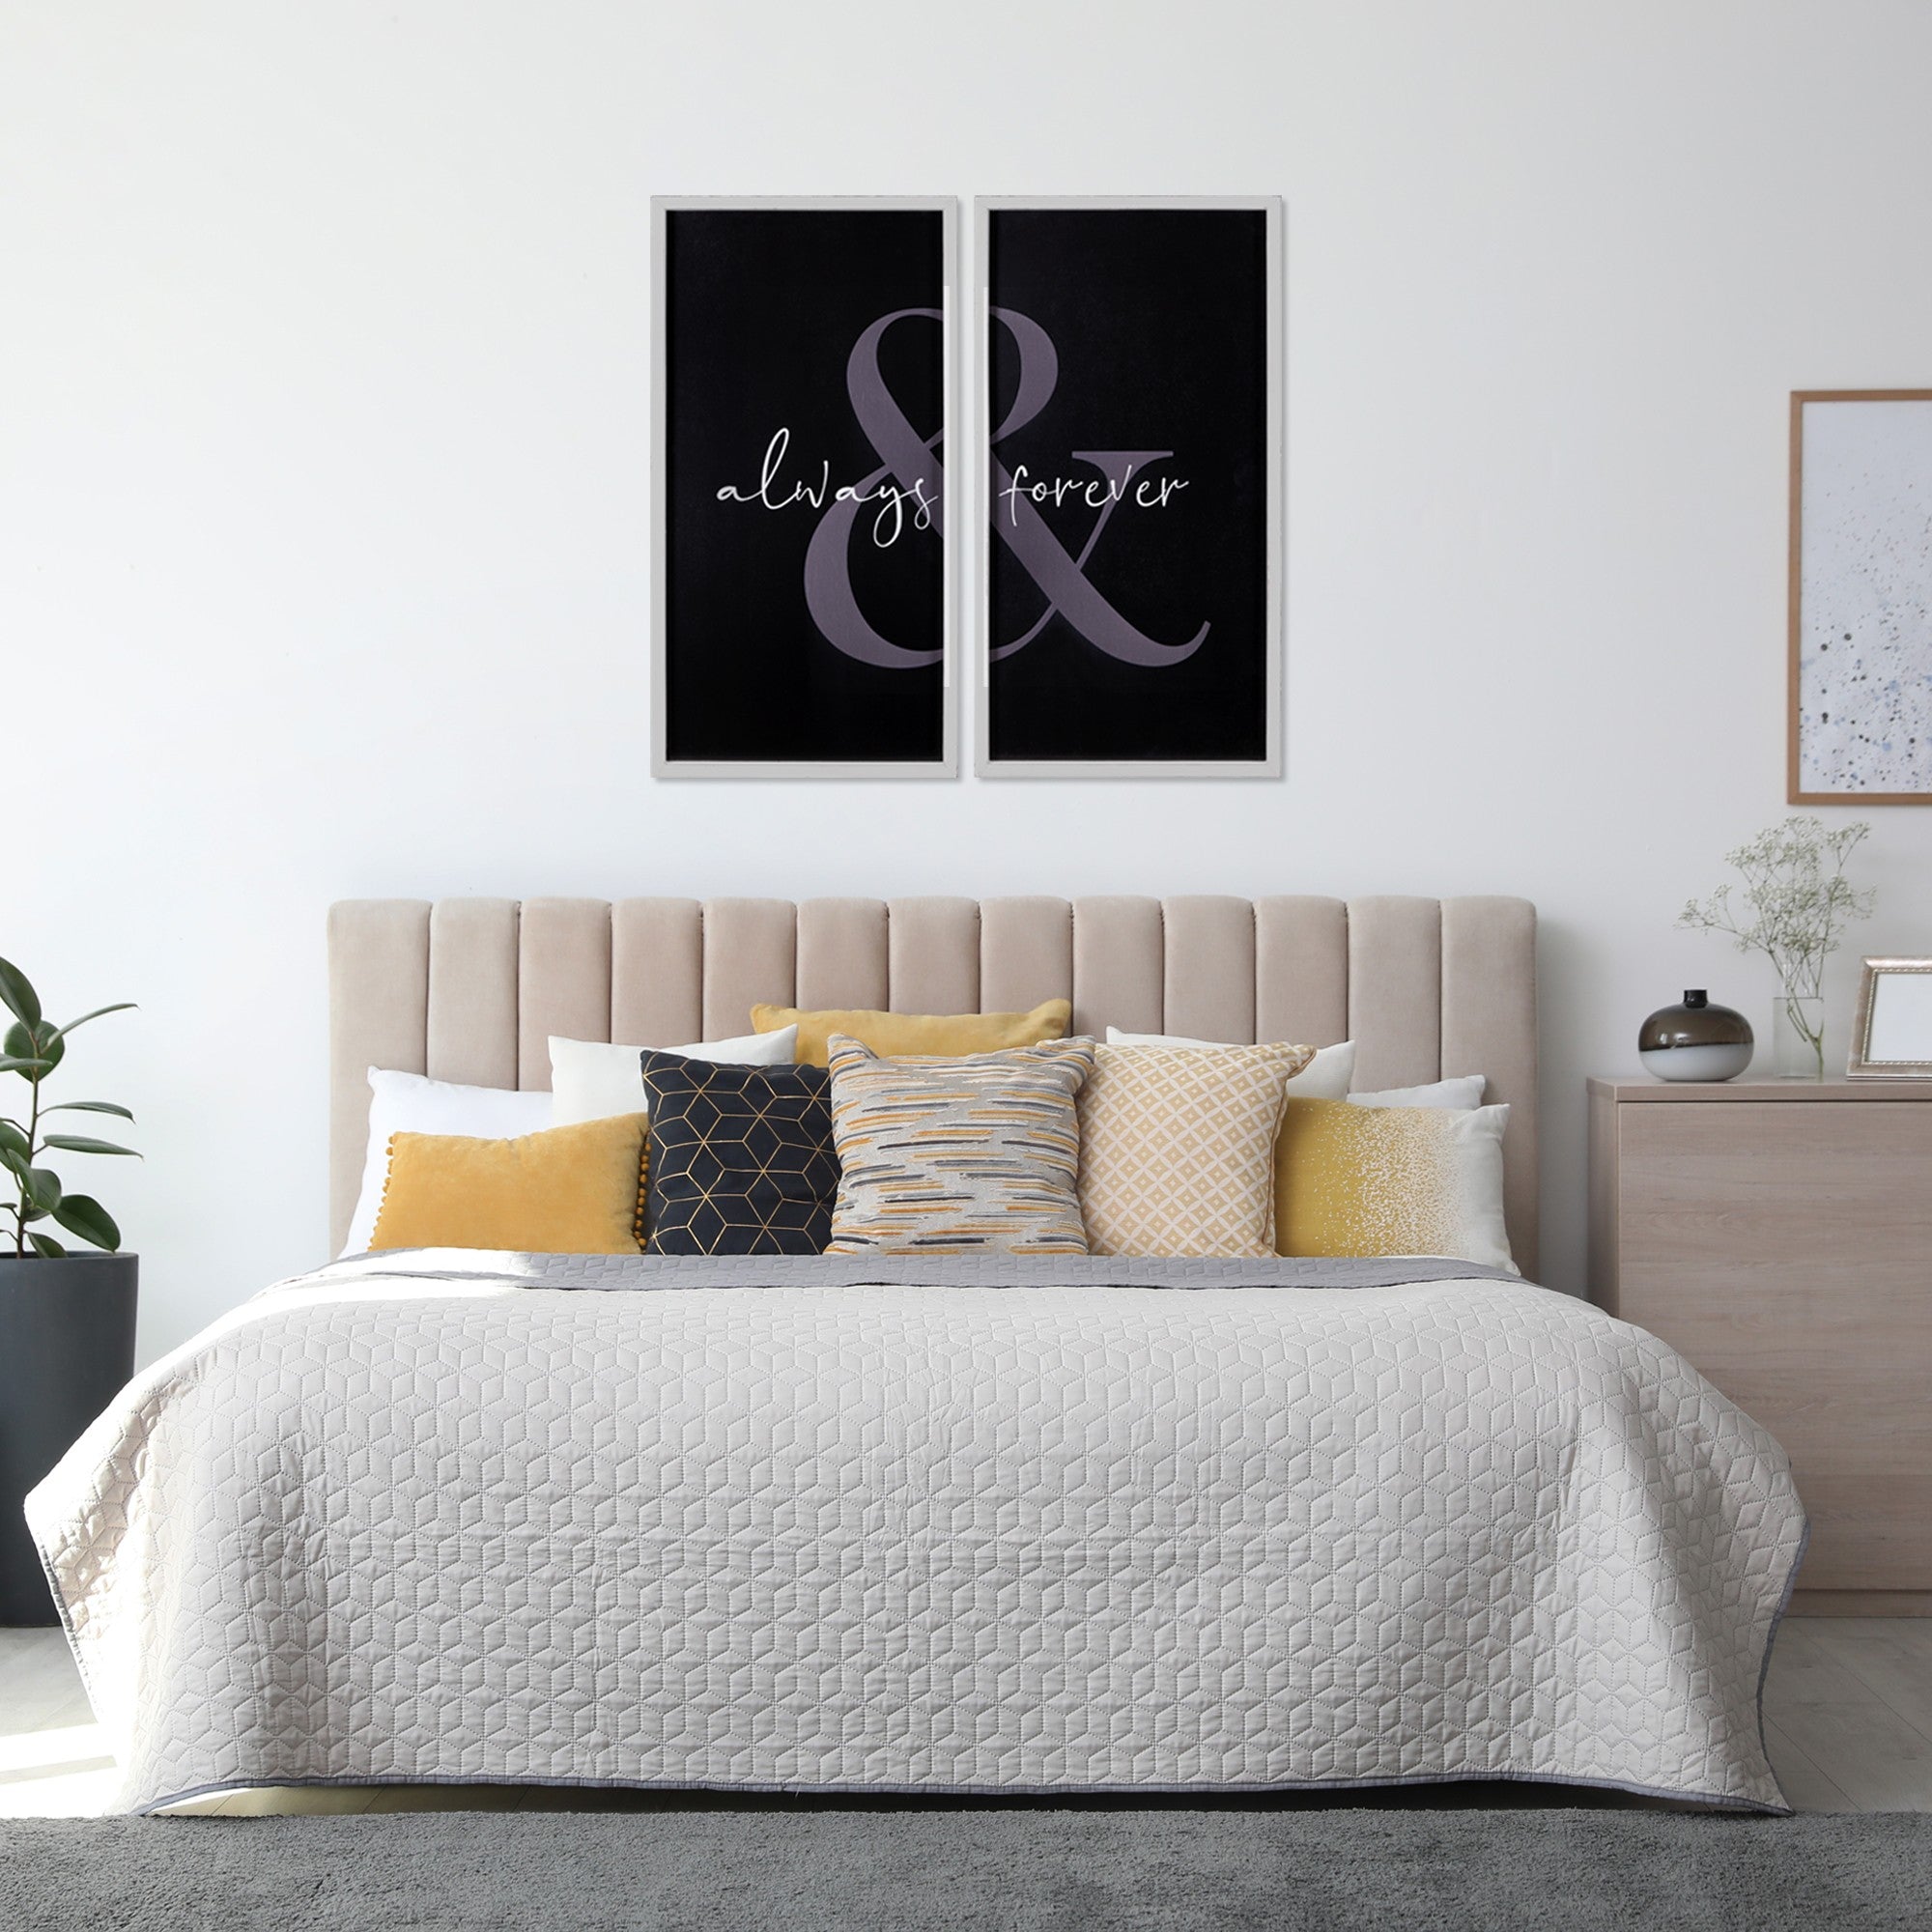 Two Piece Always and Forever Wall Art